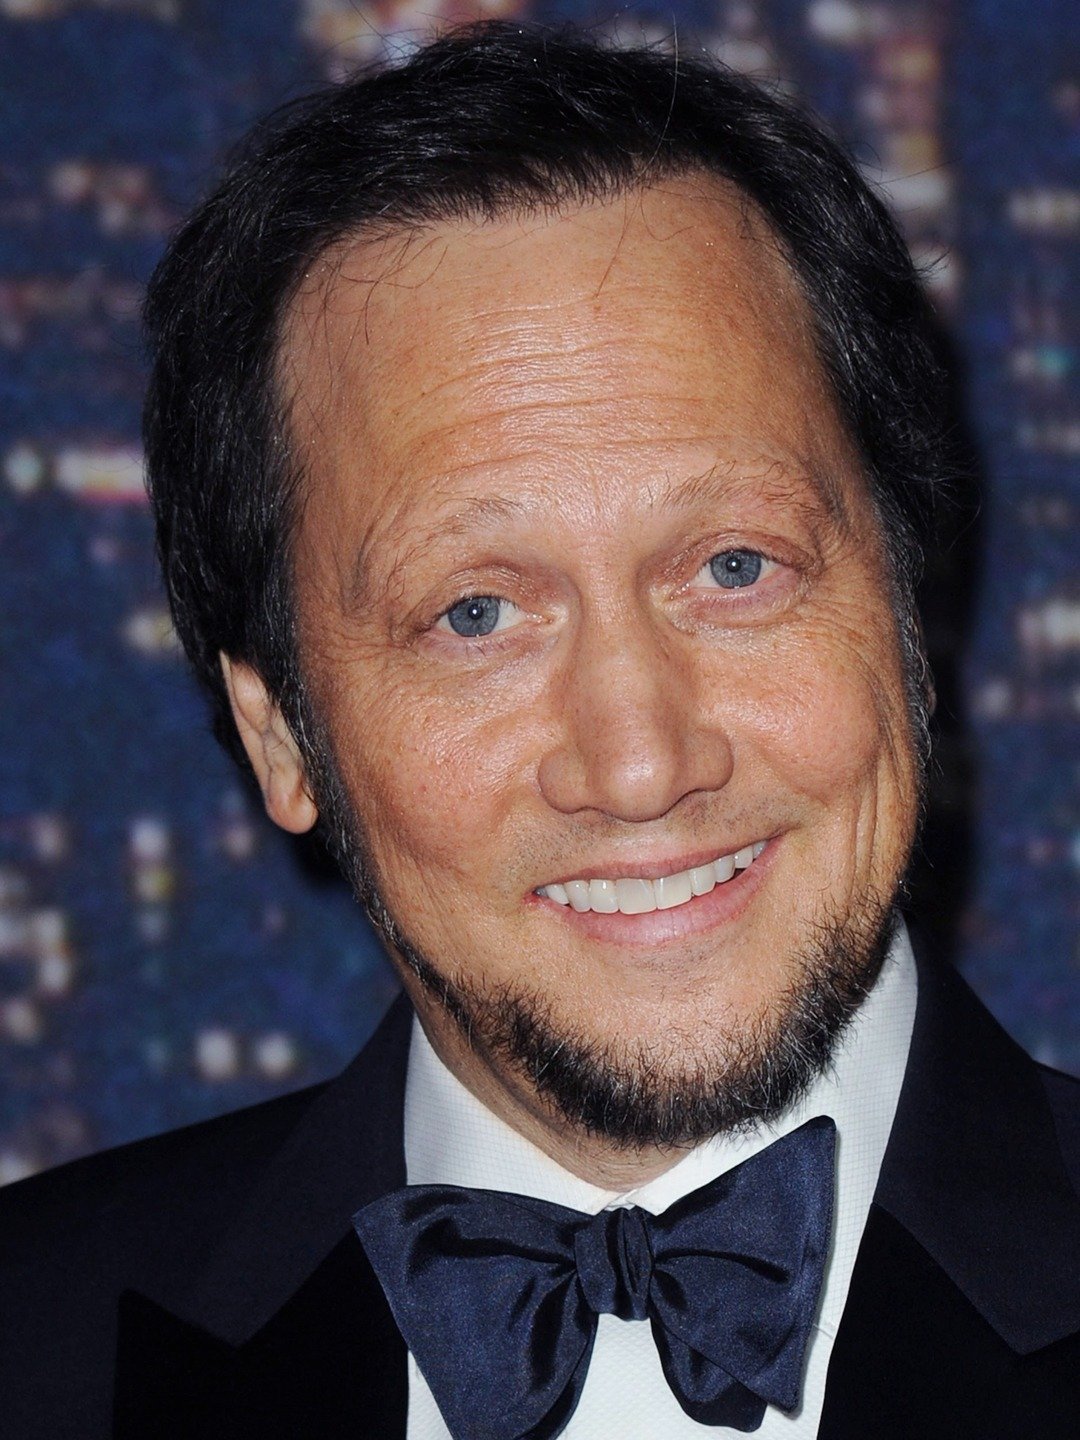 How tall is Rob Schneider?